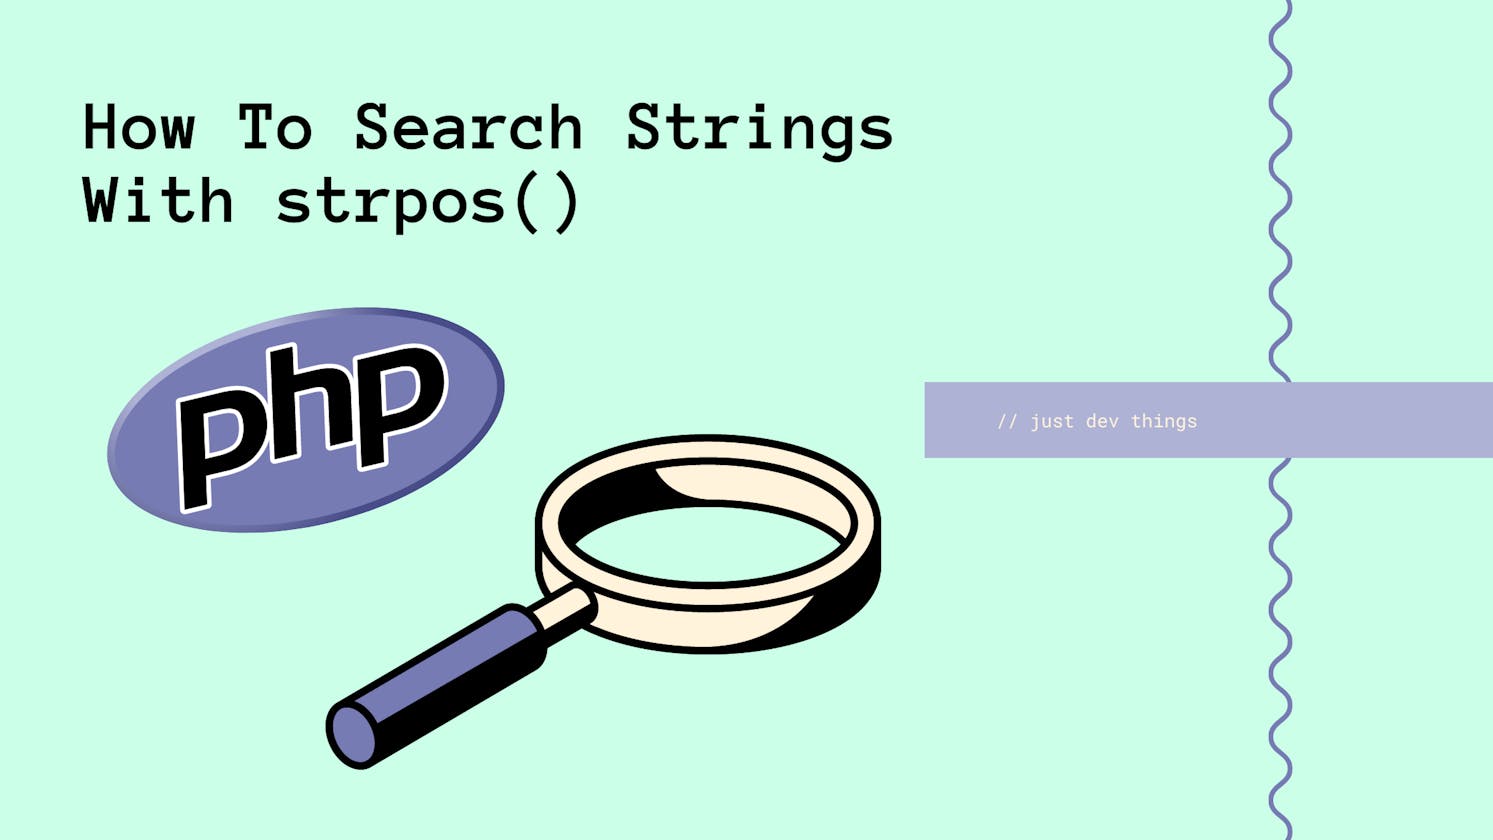 How Does strpos() Work In PHP?